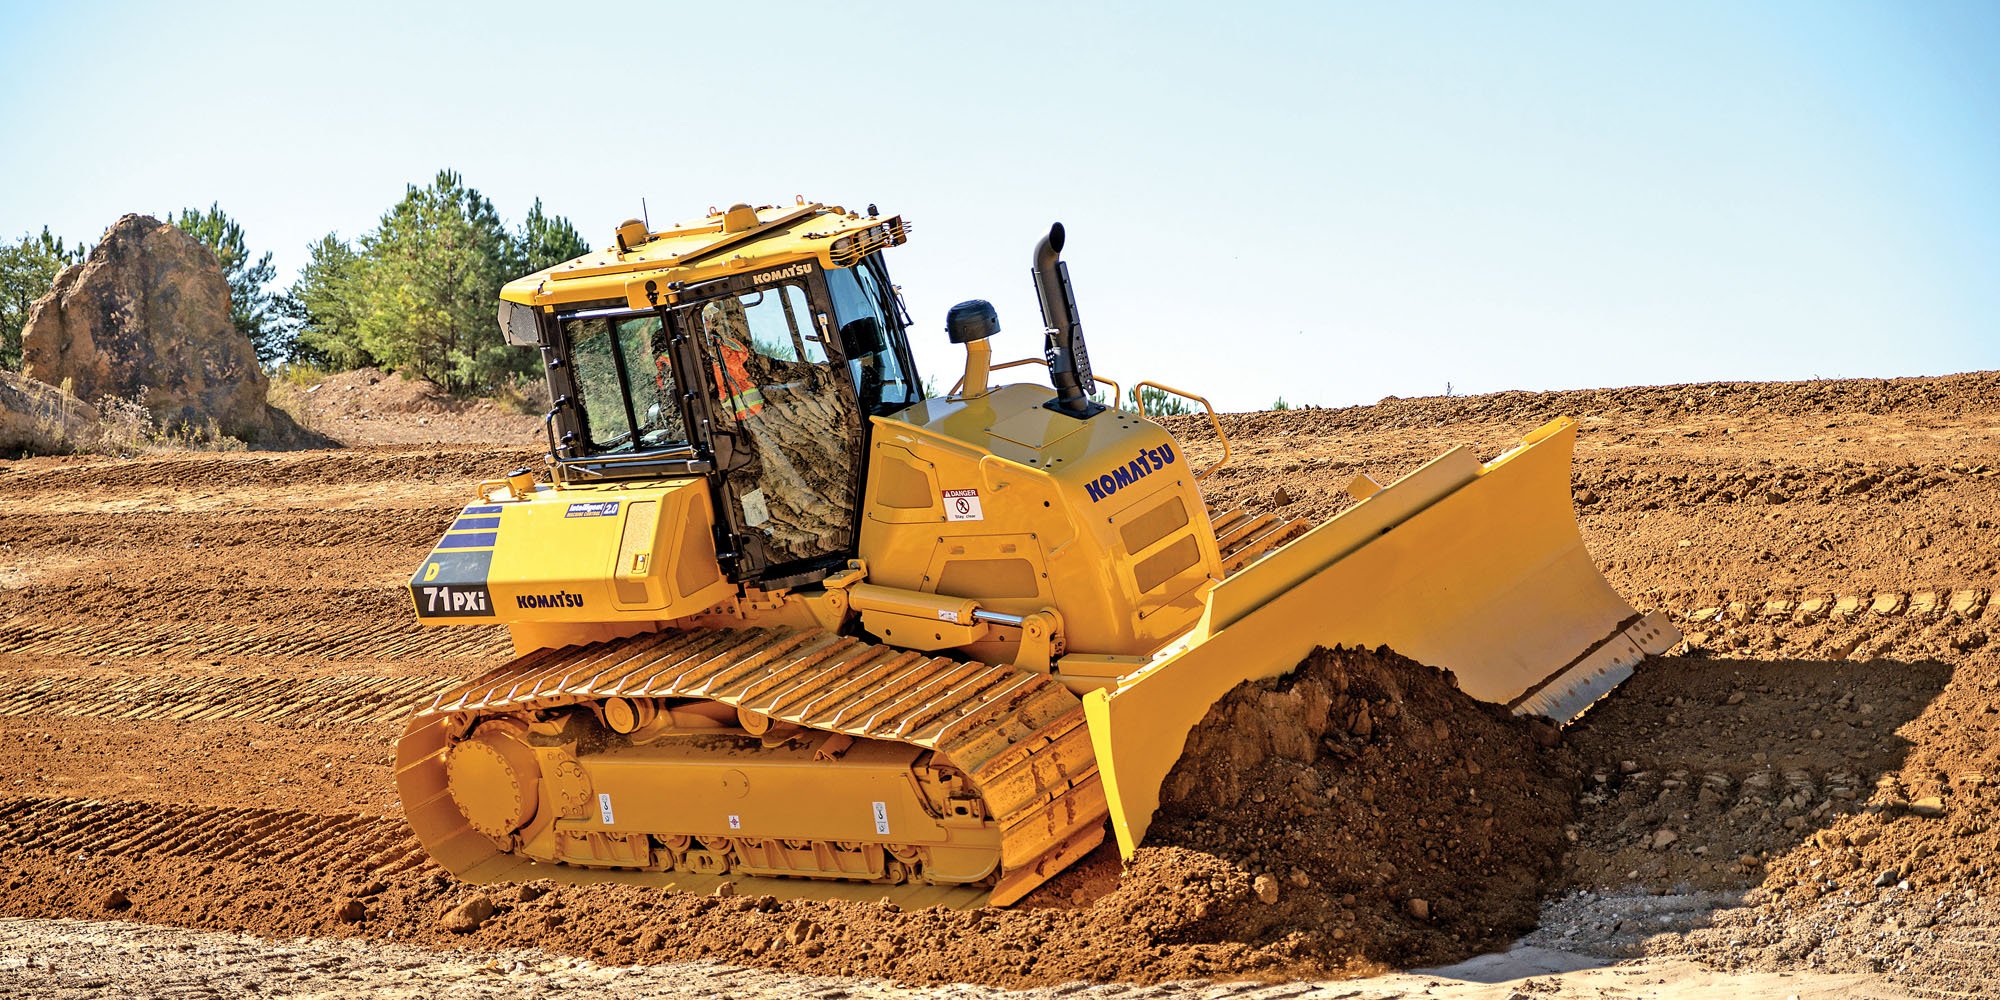 Want a Single Mid-sized Dozer that Saves You Time, Lowers Your Costs and Makes Your New Operators More Effective?